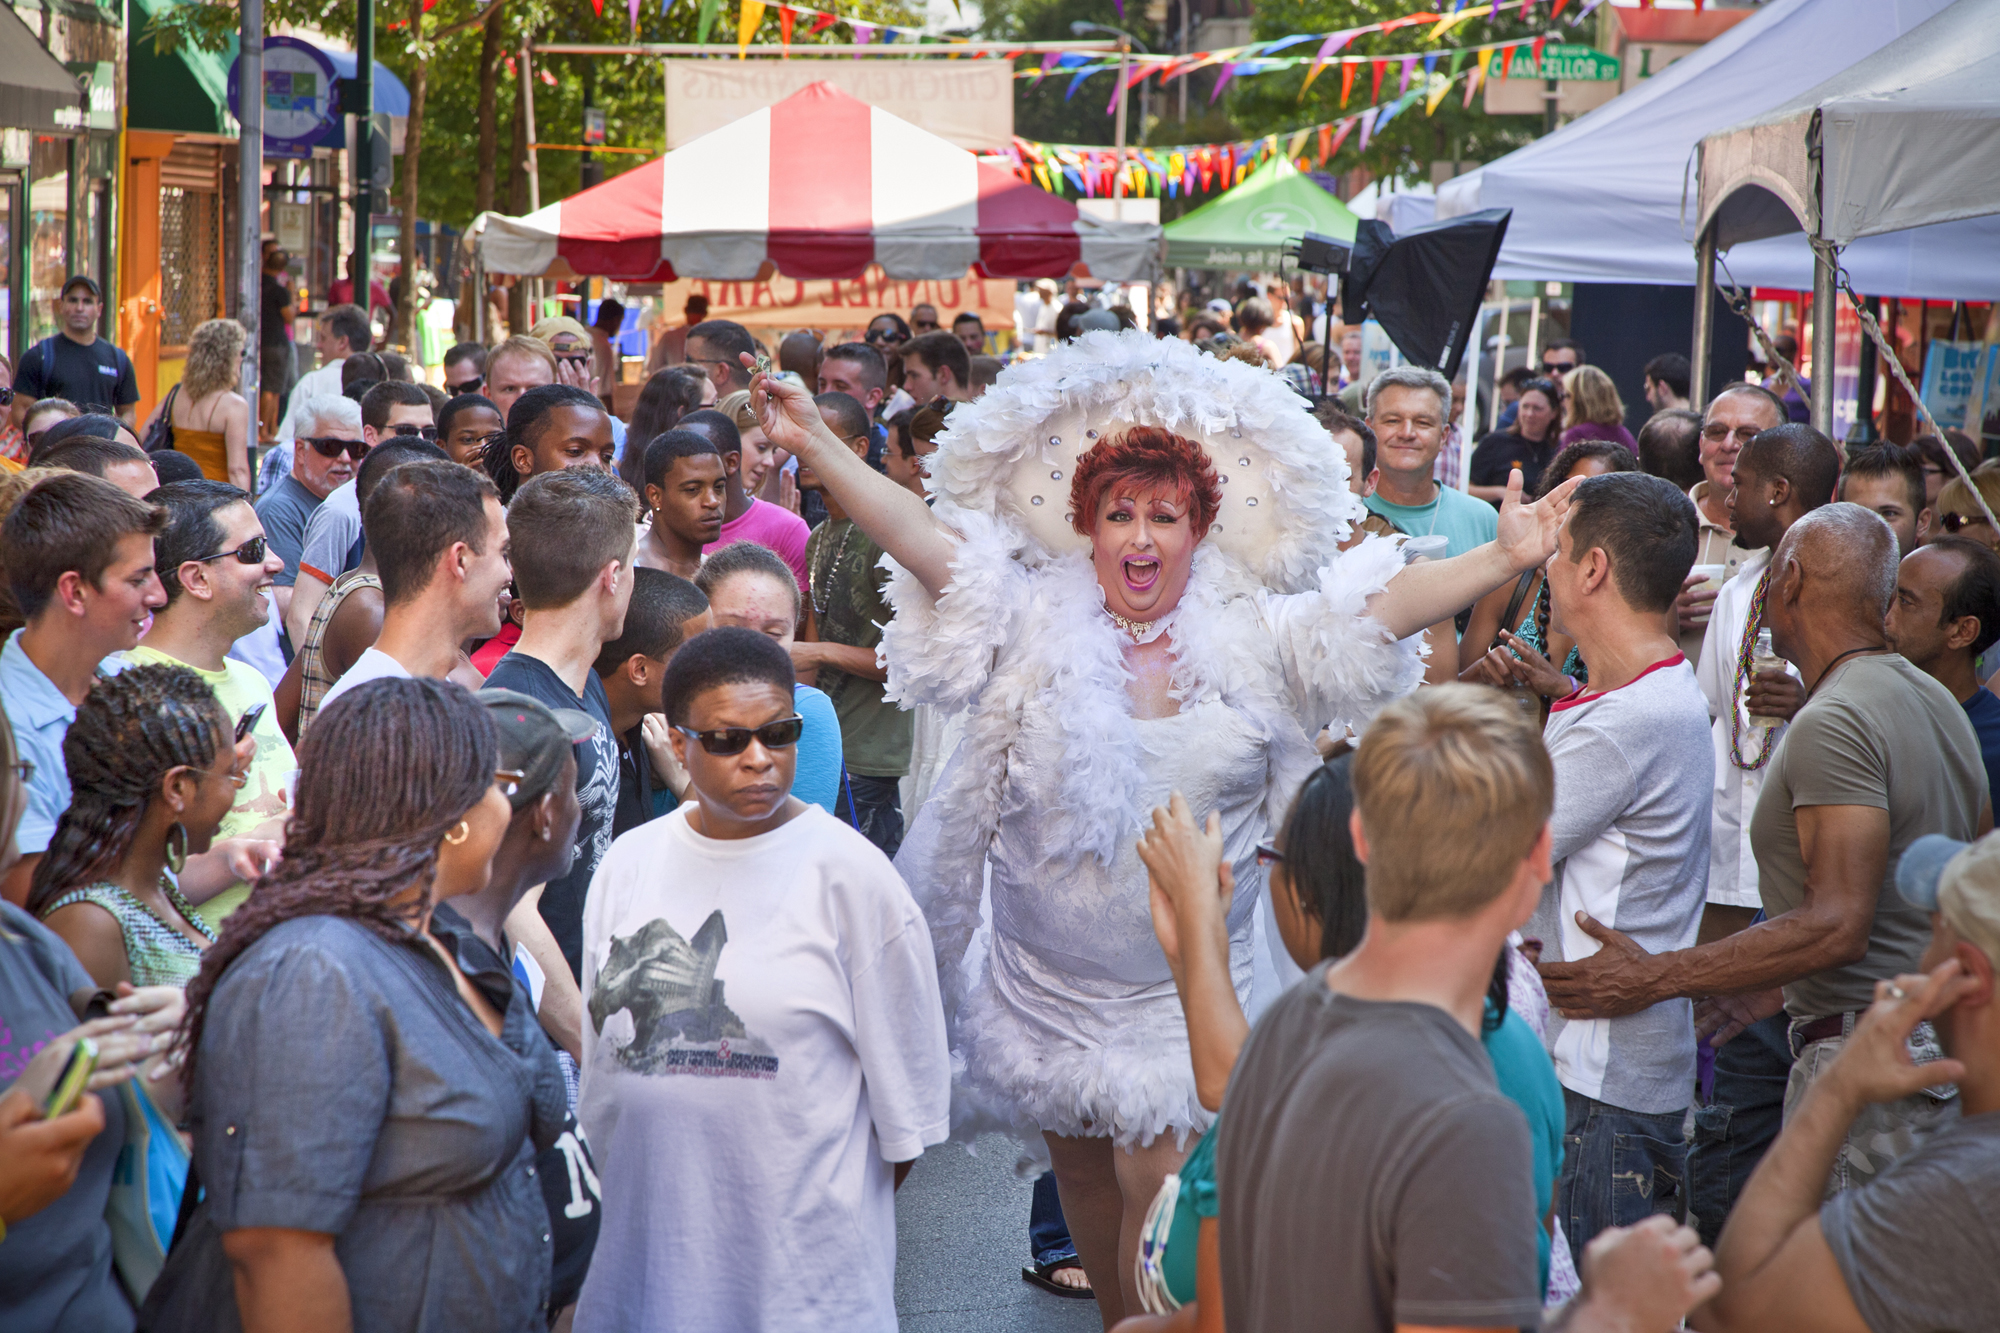 A closed off street filled with celebrants and vendors with a drag queen dressed in white with outstretched arms and a happy countenance.